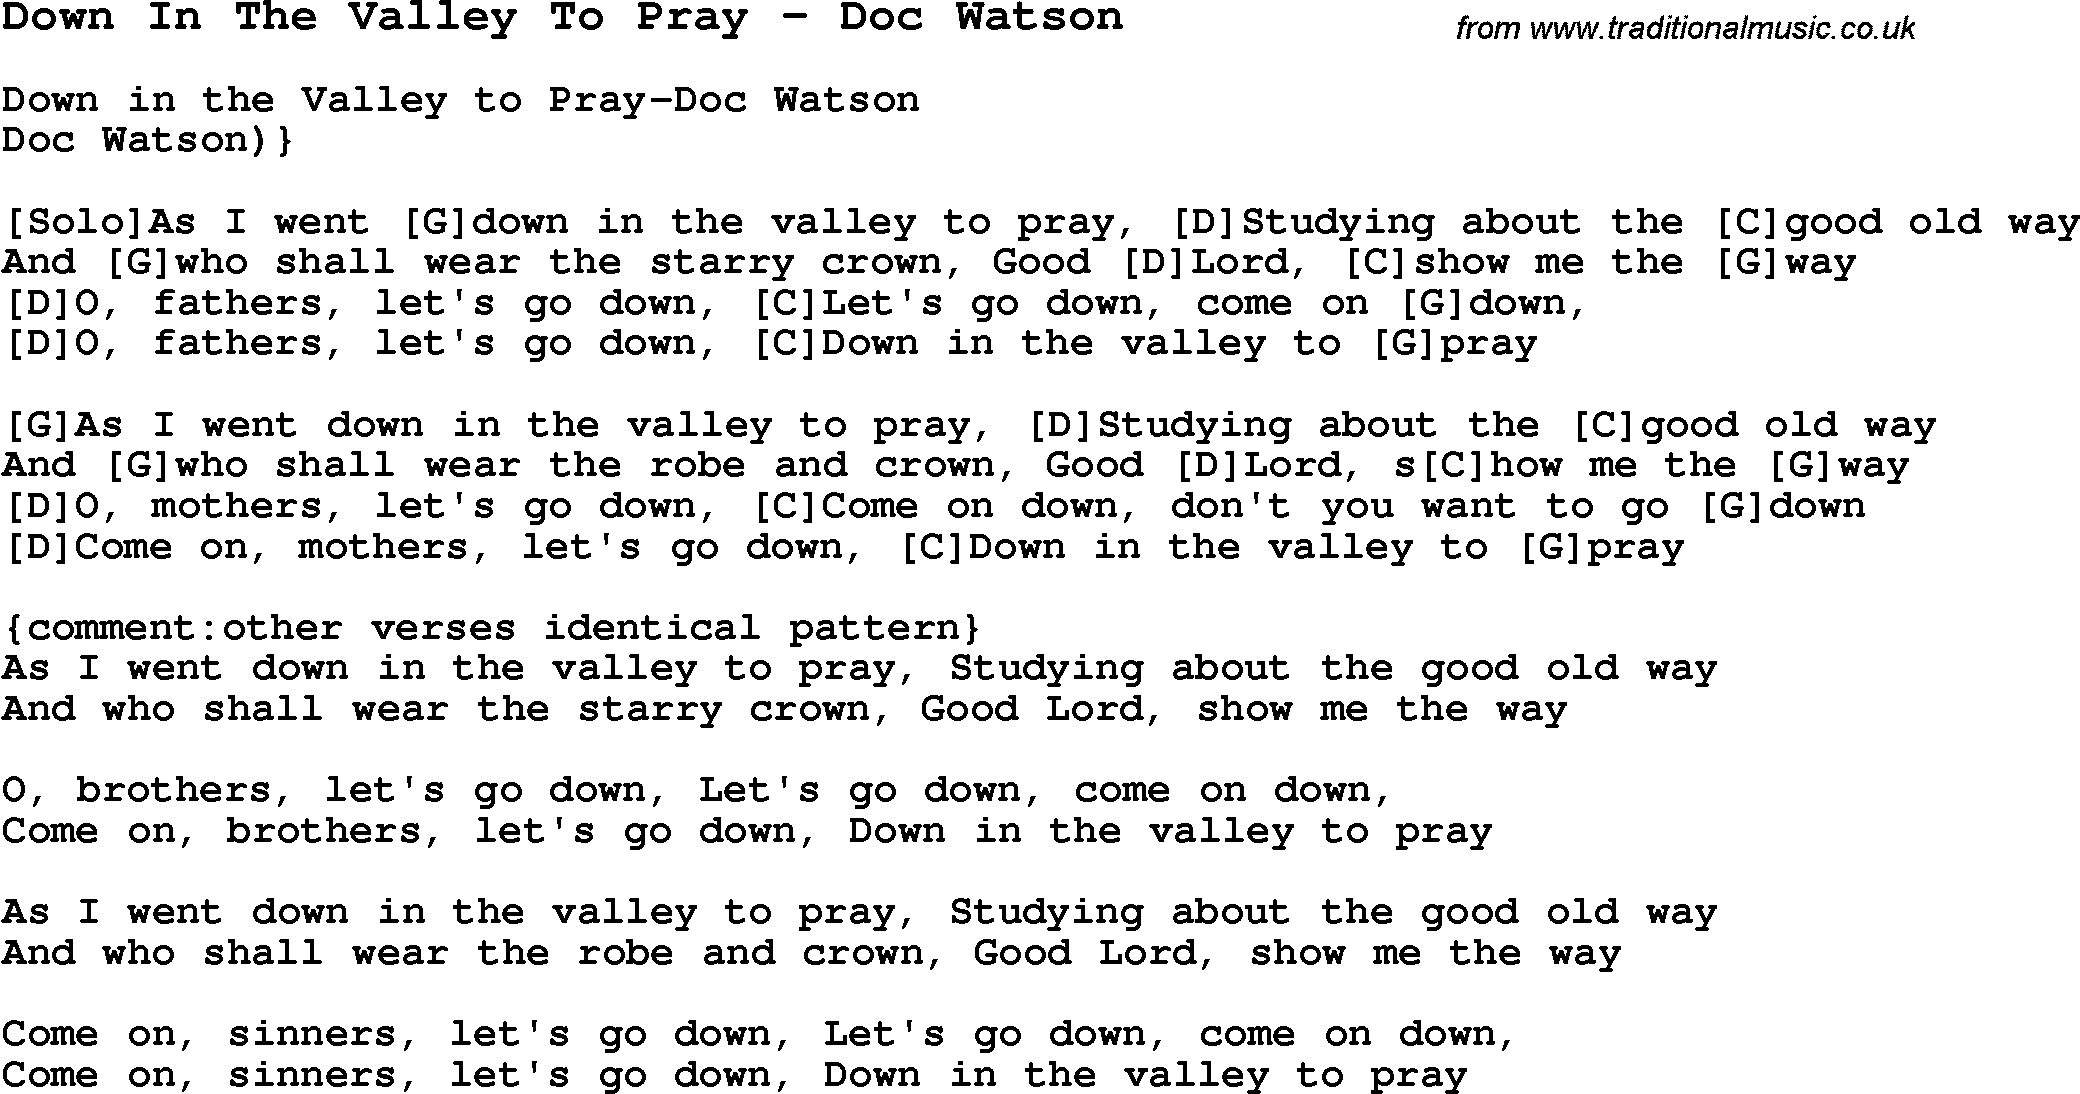 Traditional Song Down In The Valley To Pray - Doc Watson with Chords, Tabs and Lyrics